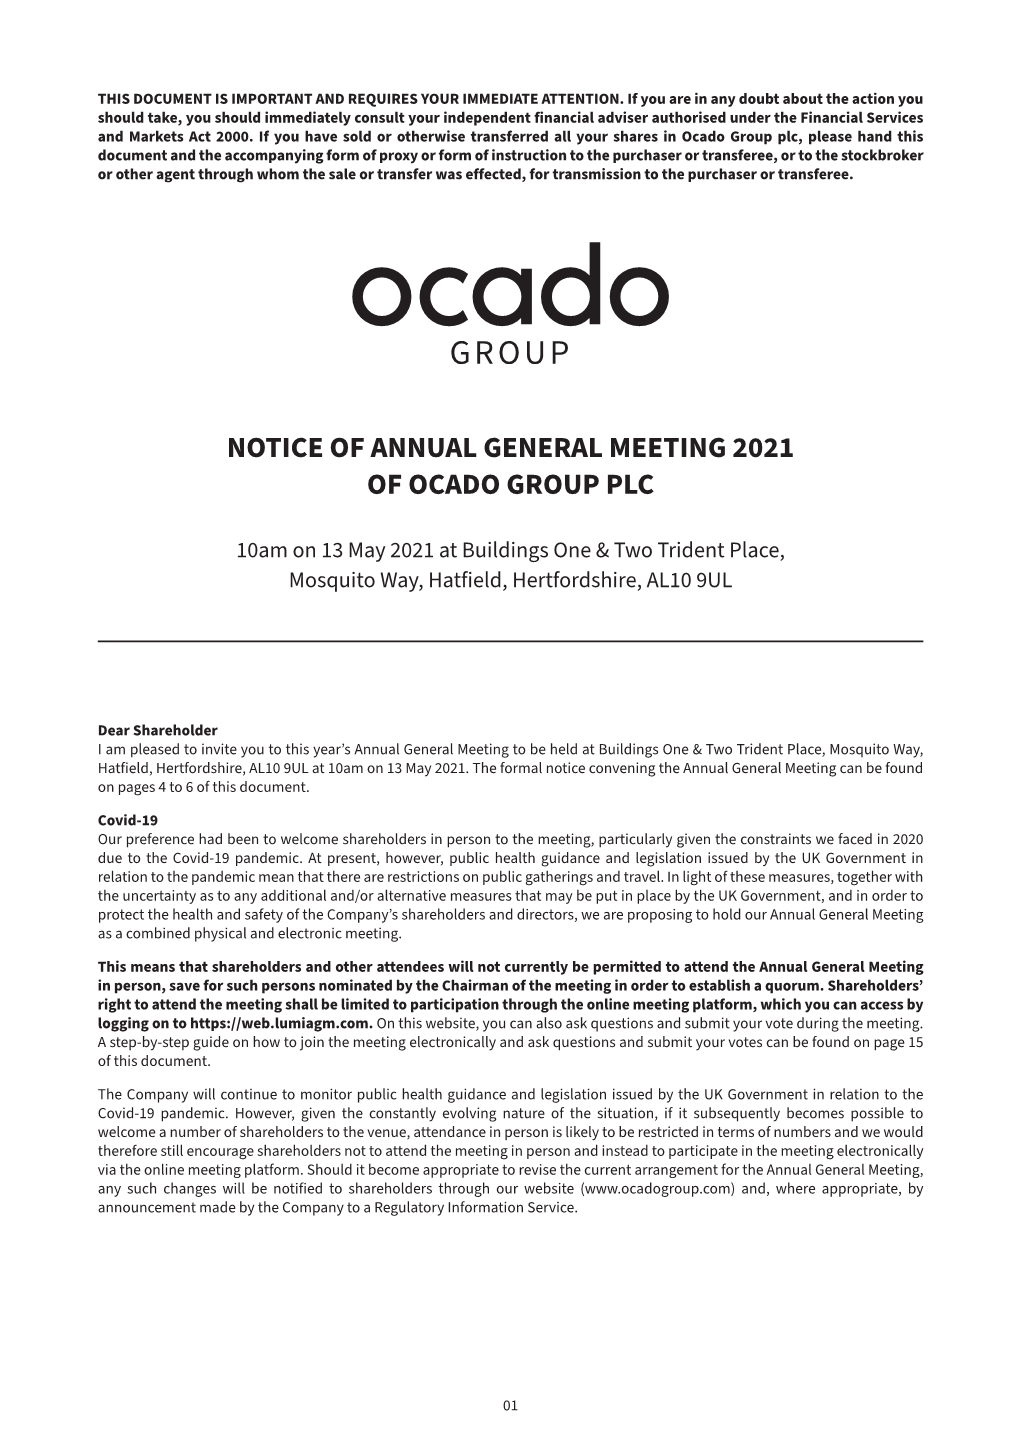 Notice of Annual General Meeting 2021 of Ocado Group Plc